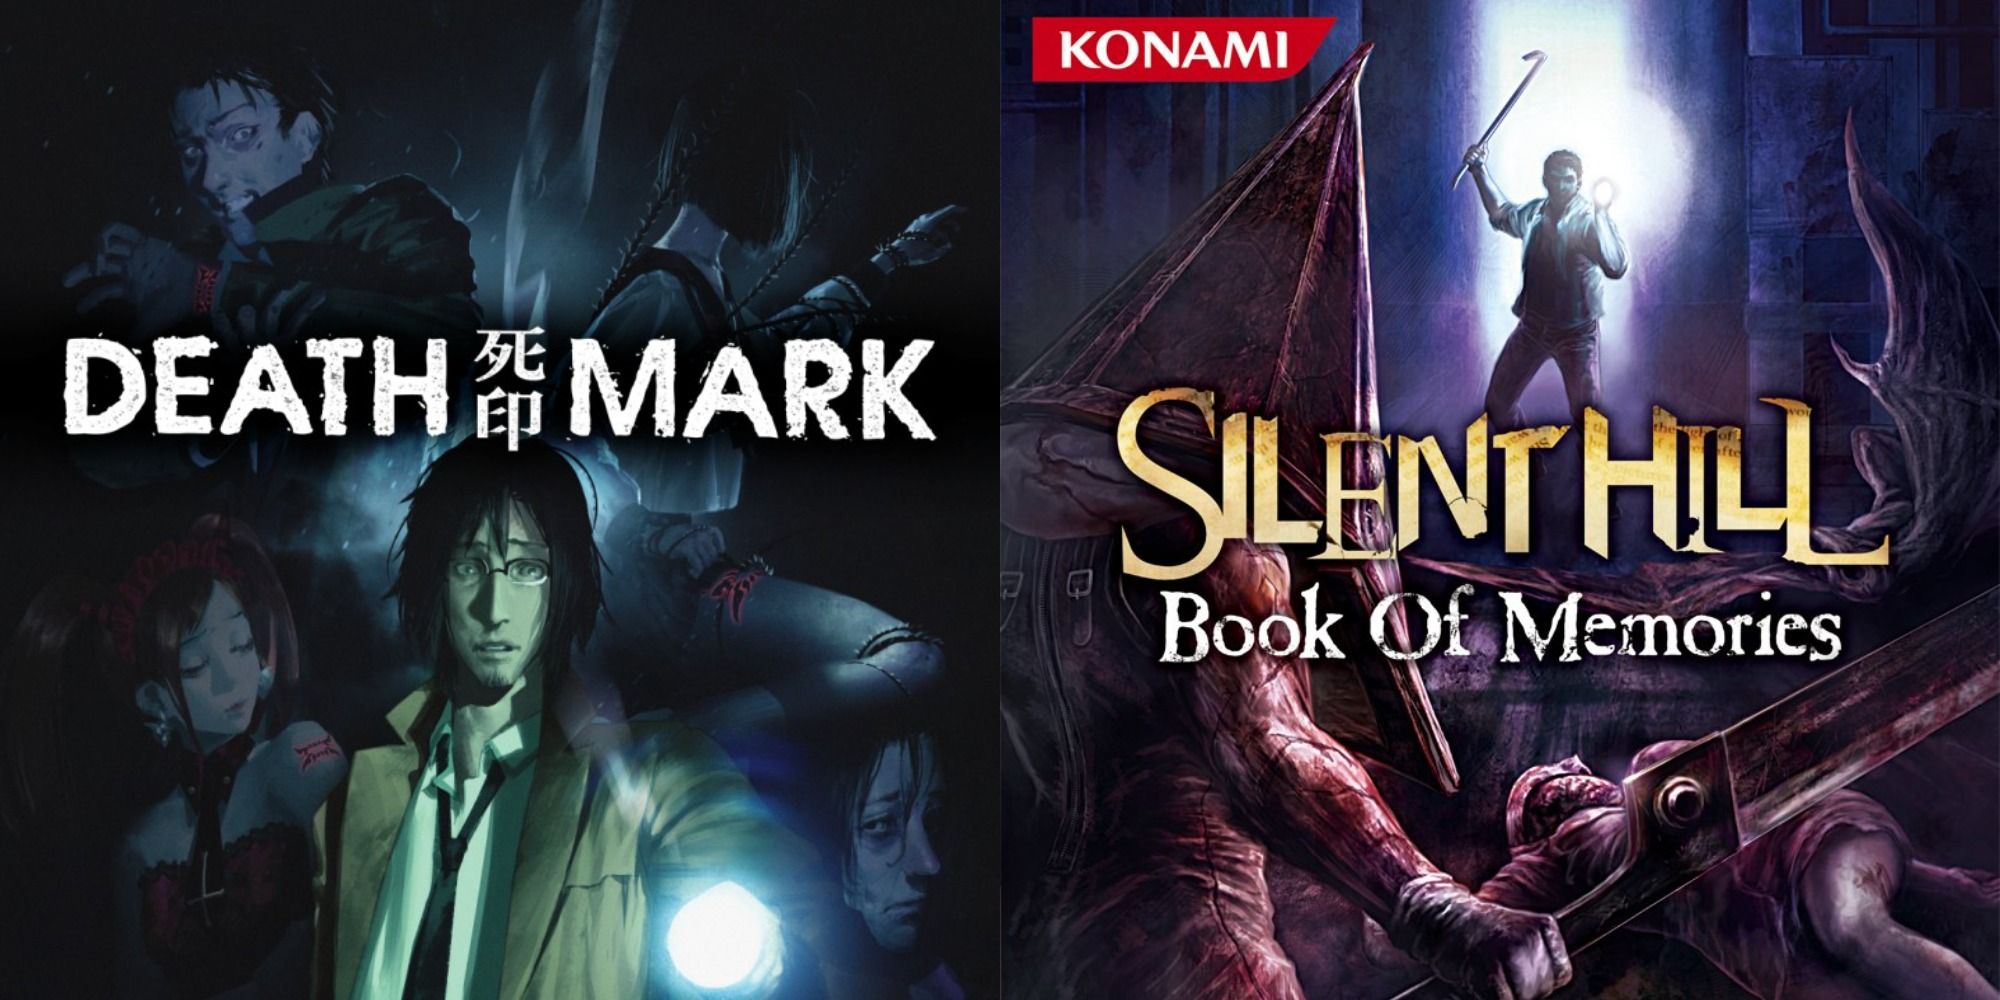 Split image showing covers for the games Spirit Hunter: Death Mark and Silent Hill: Book of Memories.